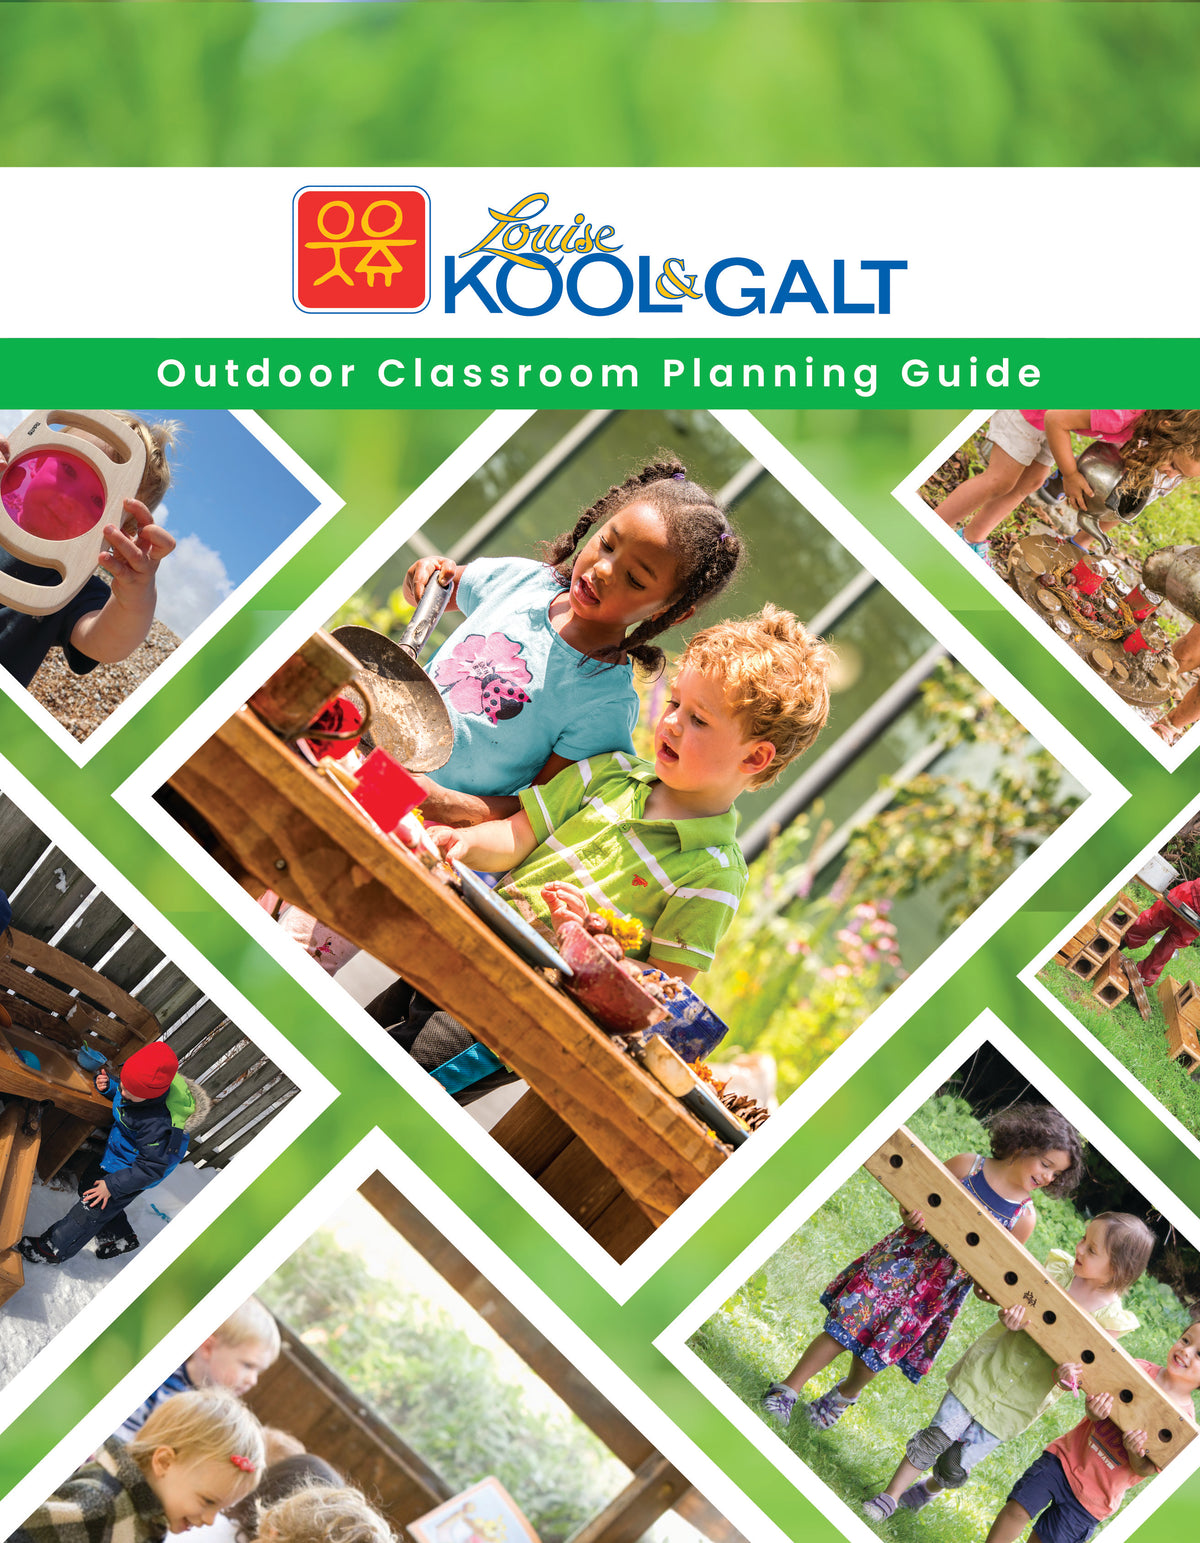 Outdoor Planning Guide Single Pages.jpg__PID:10a085d4-294d-4d25-89b0-eb329e837b4c